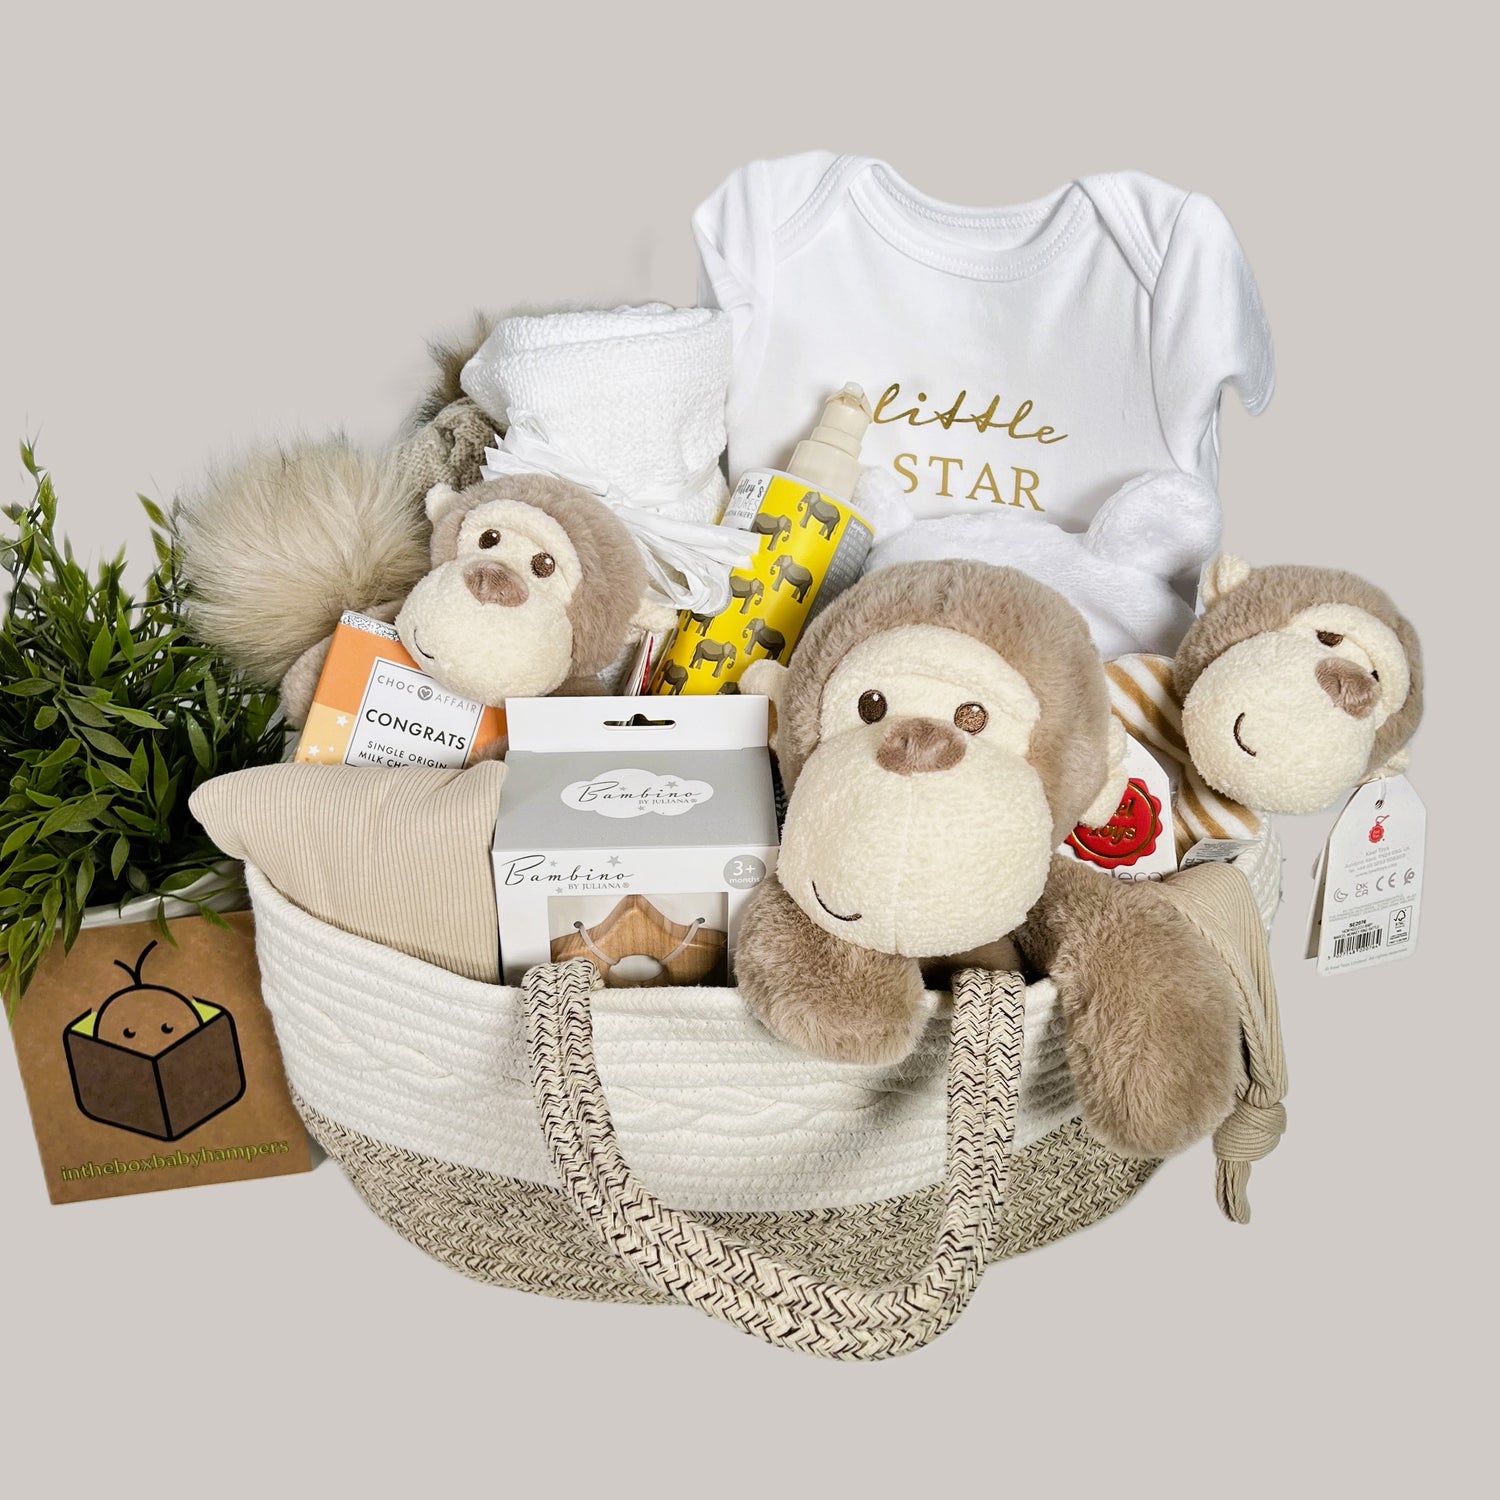 Monkey themed new baby nappy caddy baby hamper gift containing thre keeleco monkey soft toys one of which is a monkey rattle, all are made from recycled plastics, a nappy caddy , a white baby dressing gown, a wooden star teether, baby body lotion, congratulations chocolate.